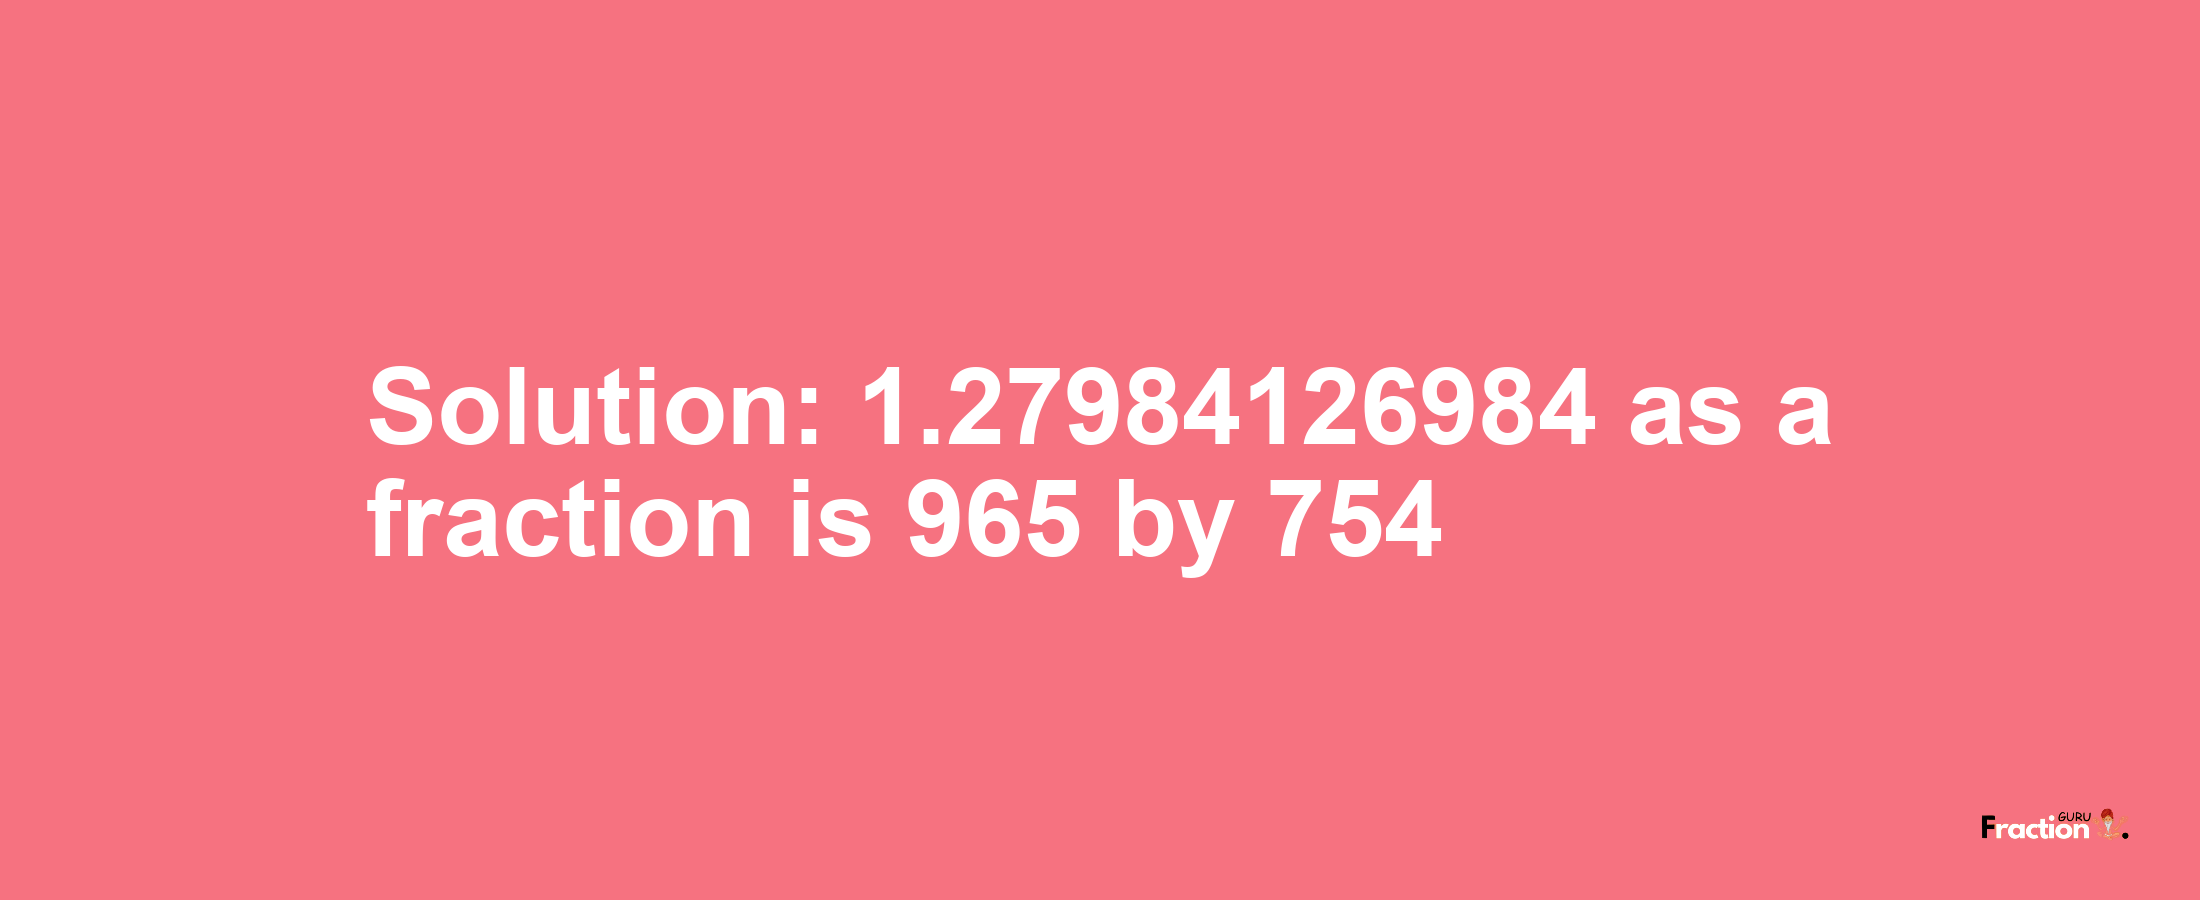 Solution:1.27984126984 as a fraction is 965/754